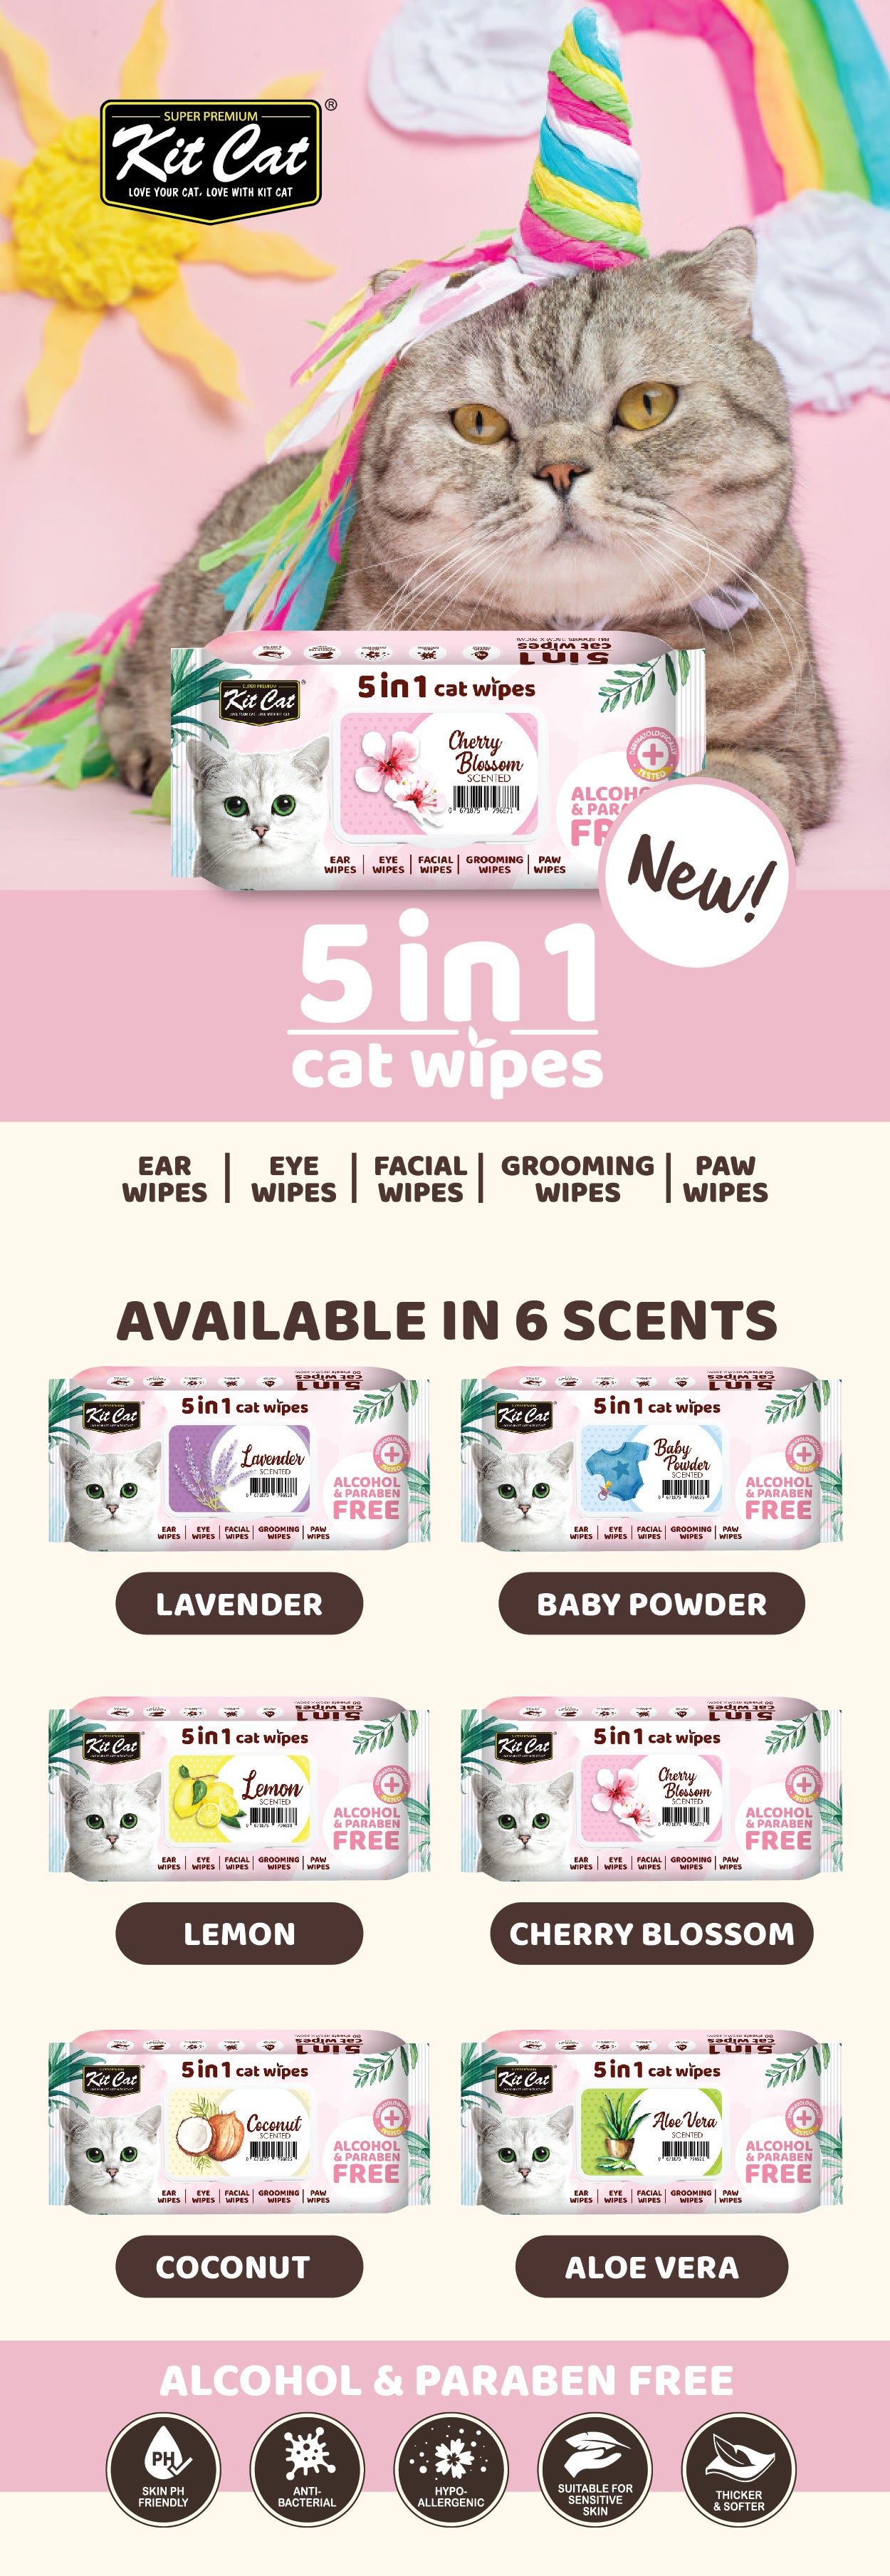 Kit Cat 5 in 1 Cat Wipes - Cherry Blossom (80pcs) | Paraben & Alcohol Free